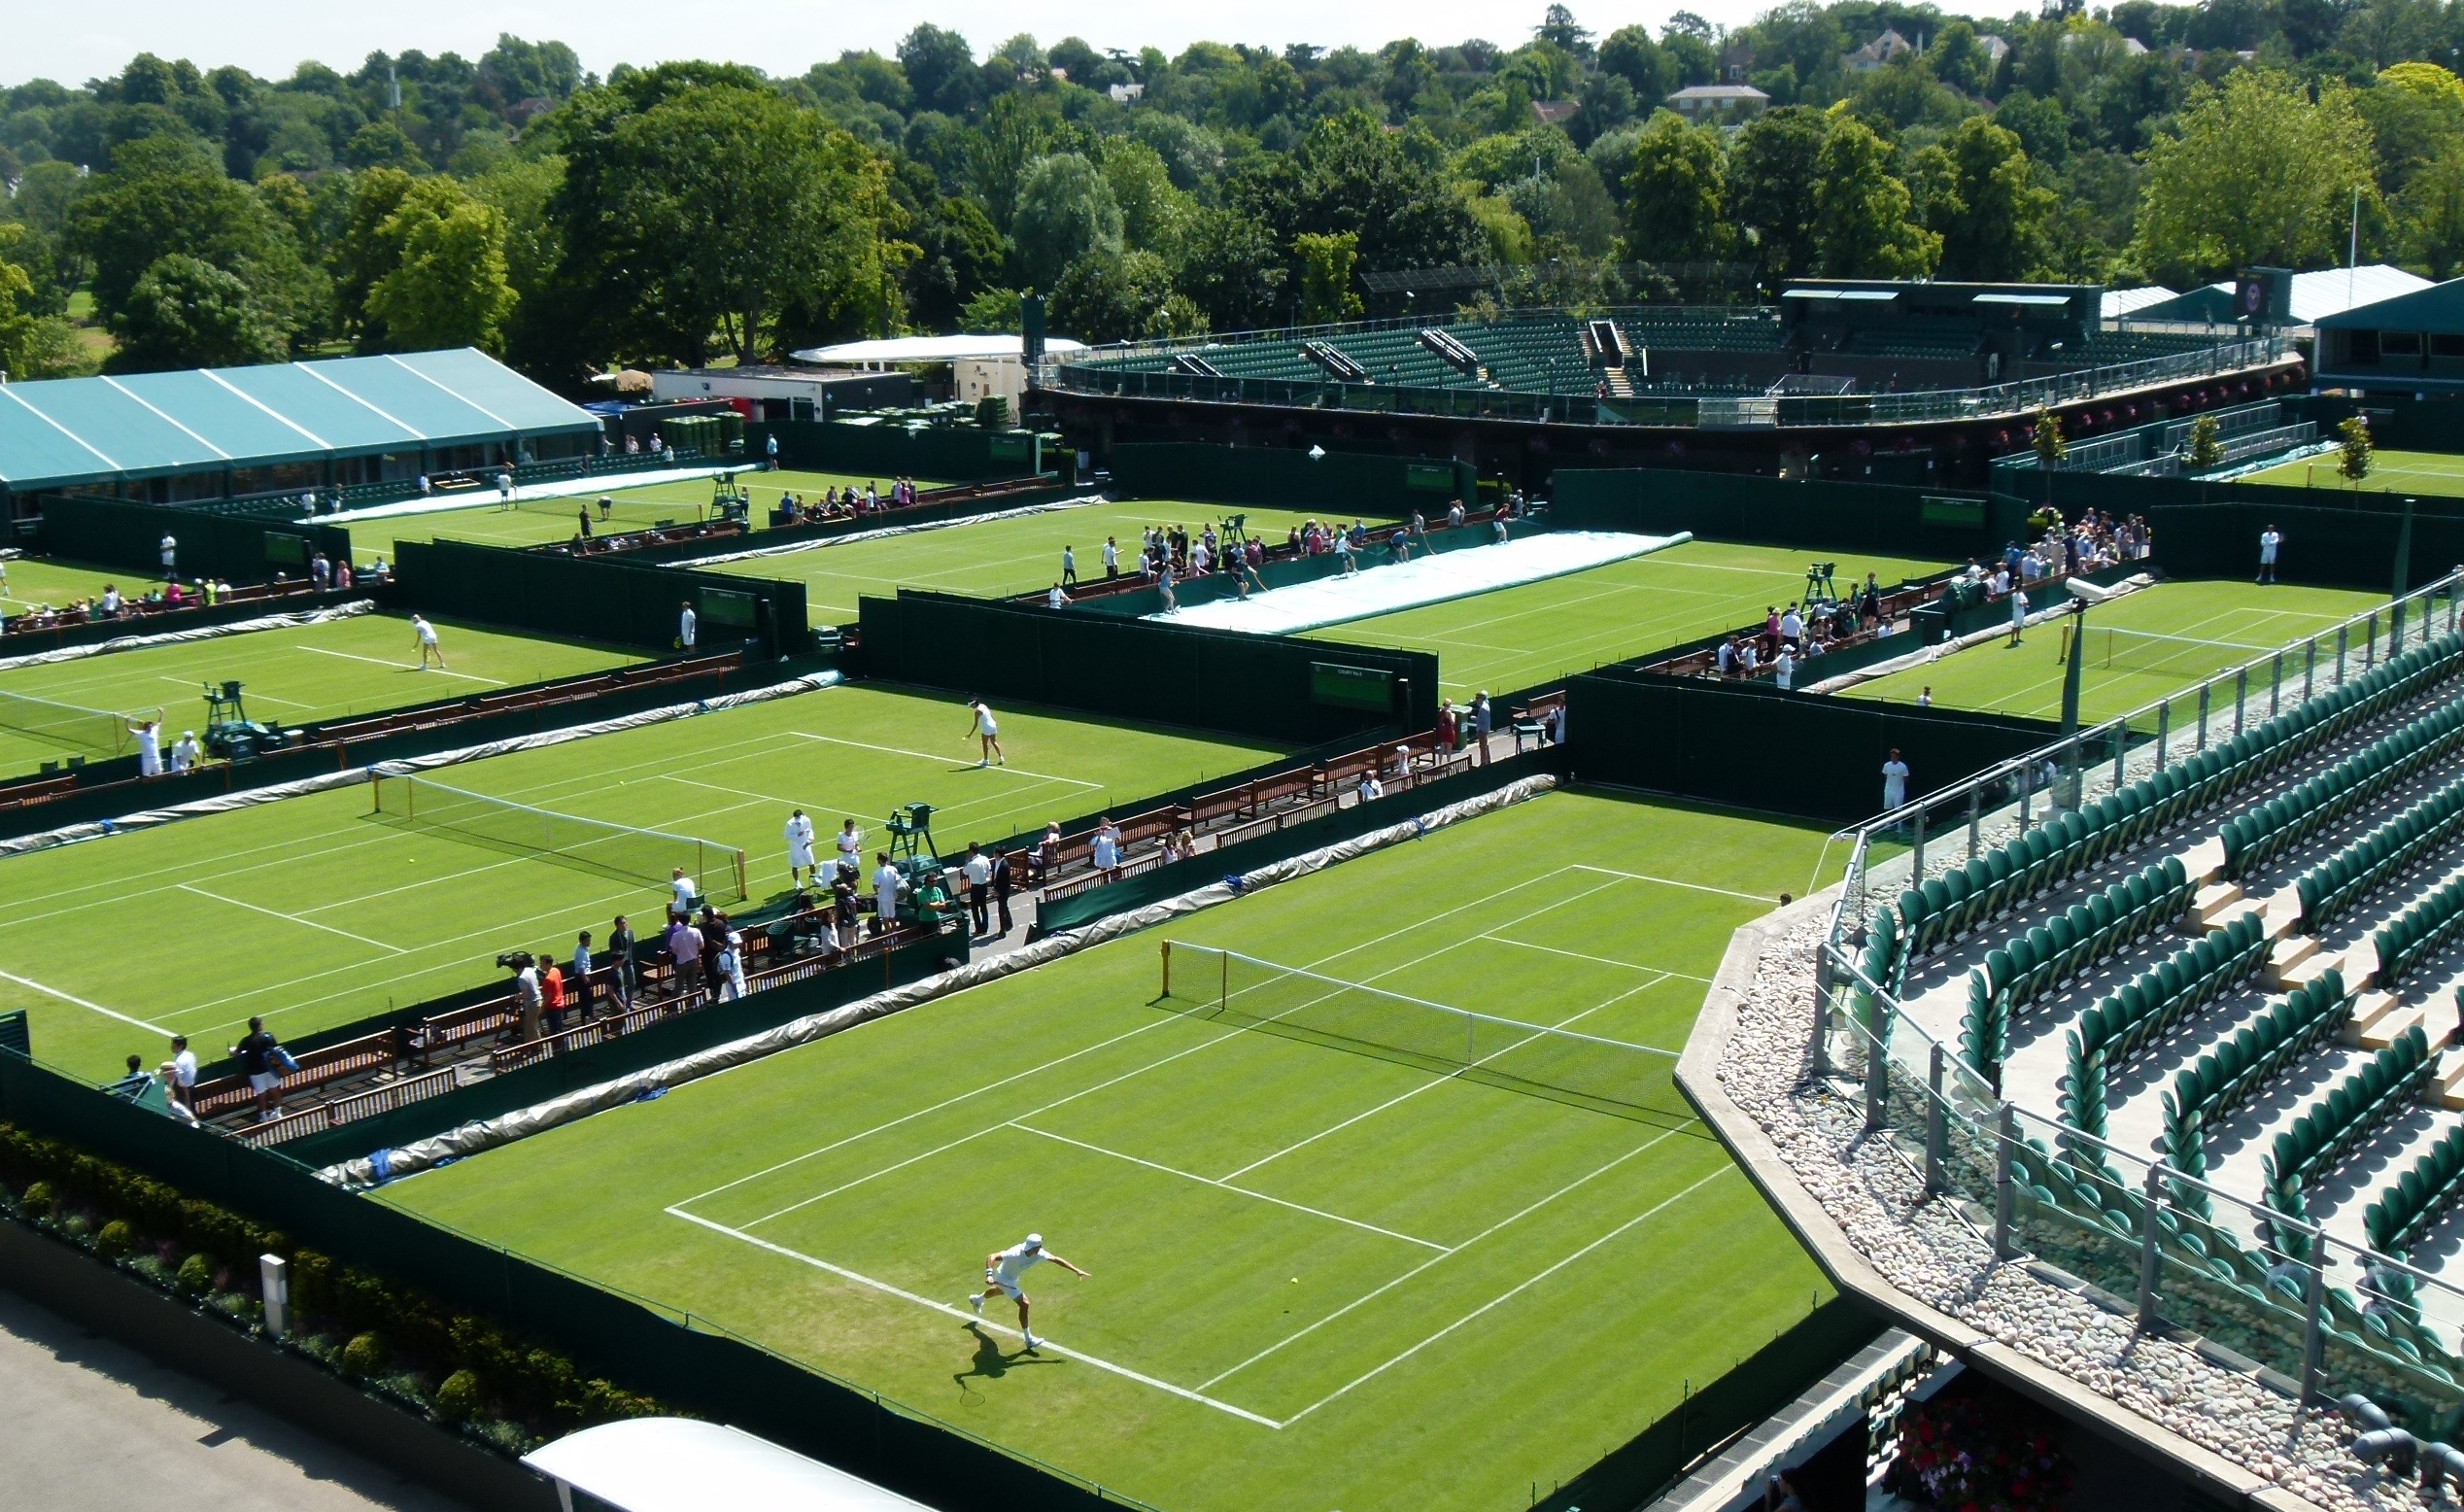 MatchPoint - Advanced Turf Solutions